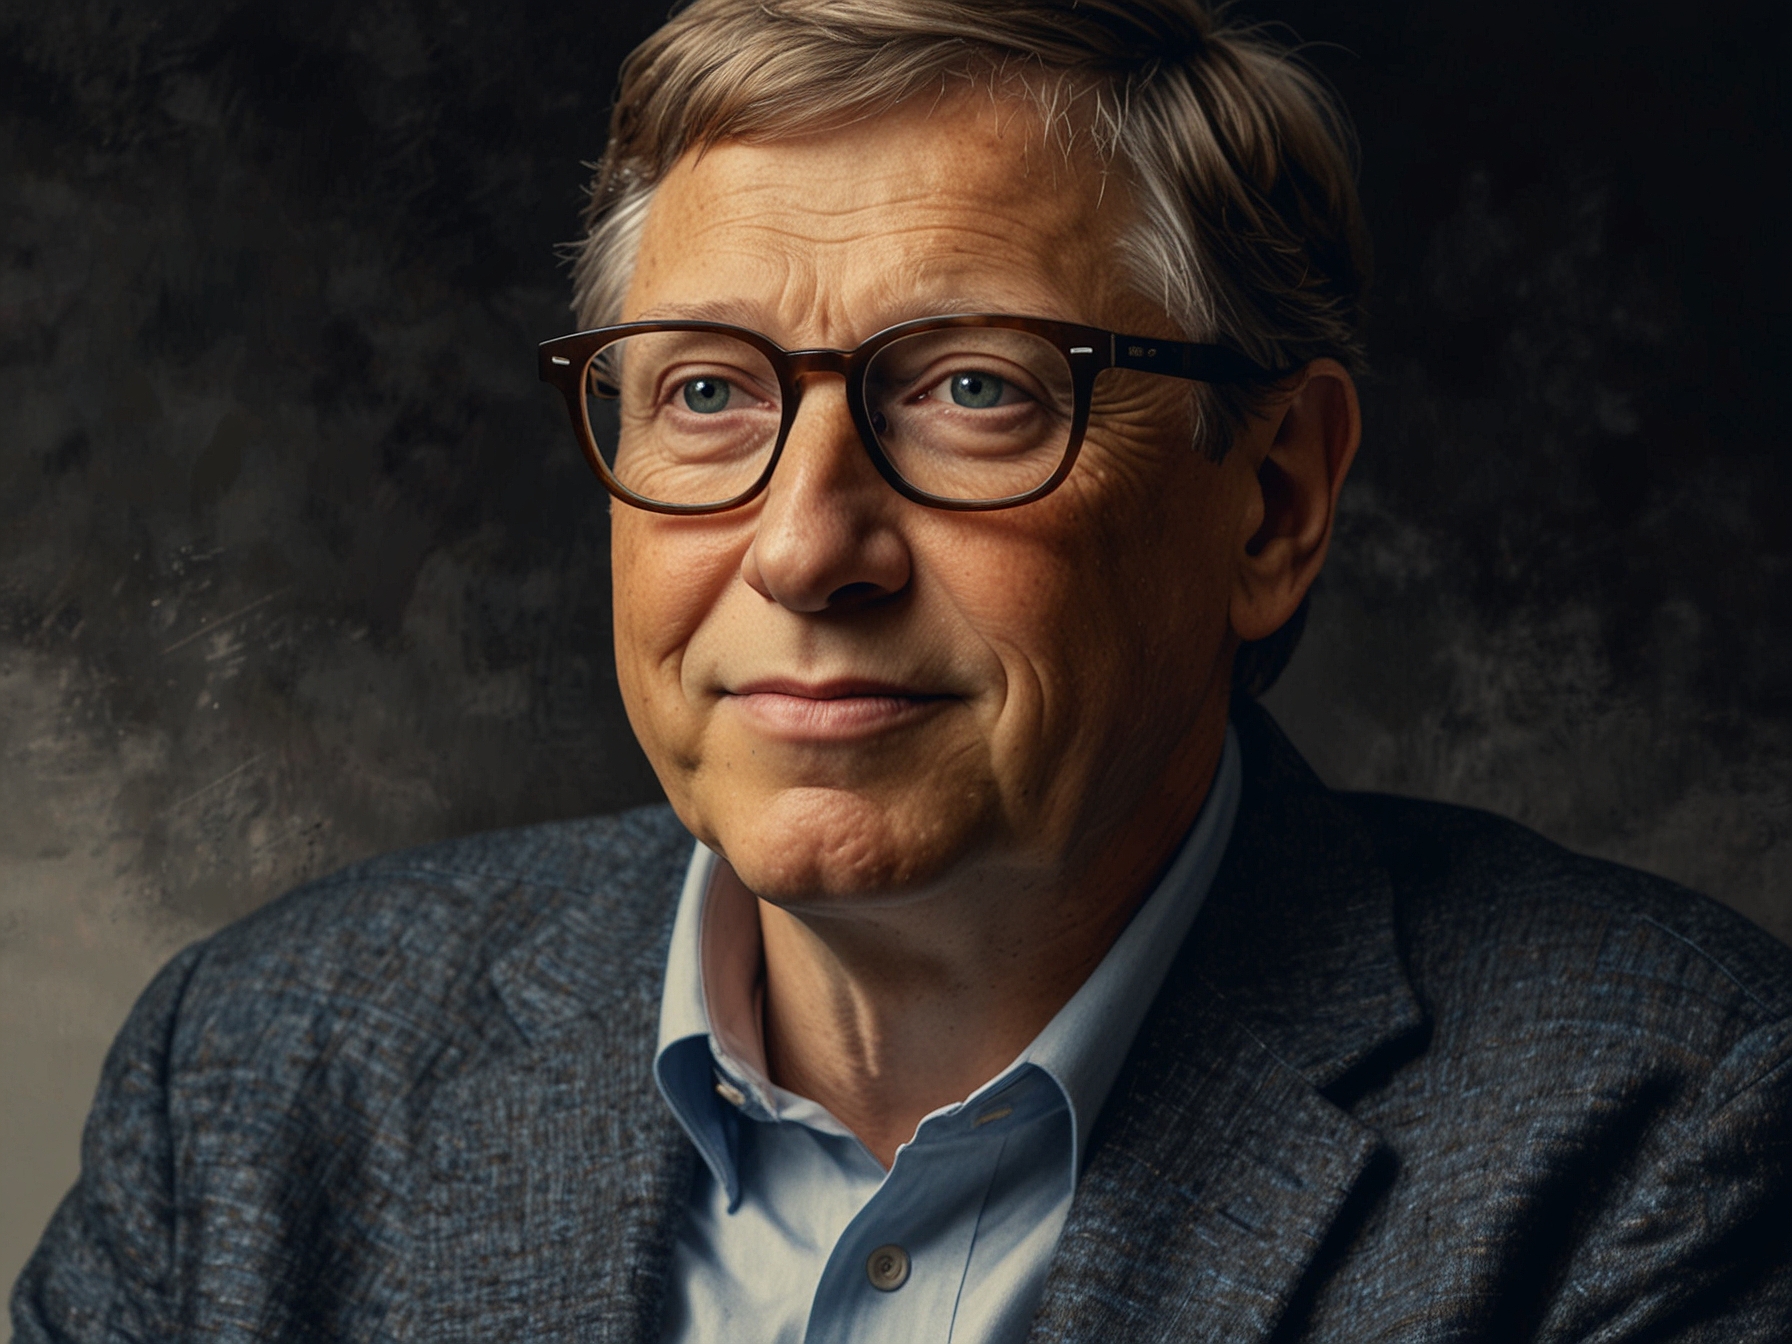 Bill Gates discusses the balance between AI's significant energy consumption and its potential contributions to advancing sustainable energy solutions.